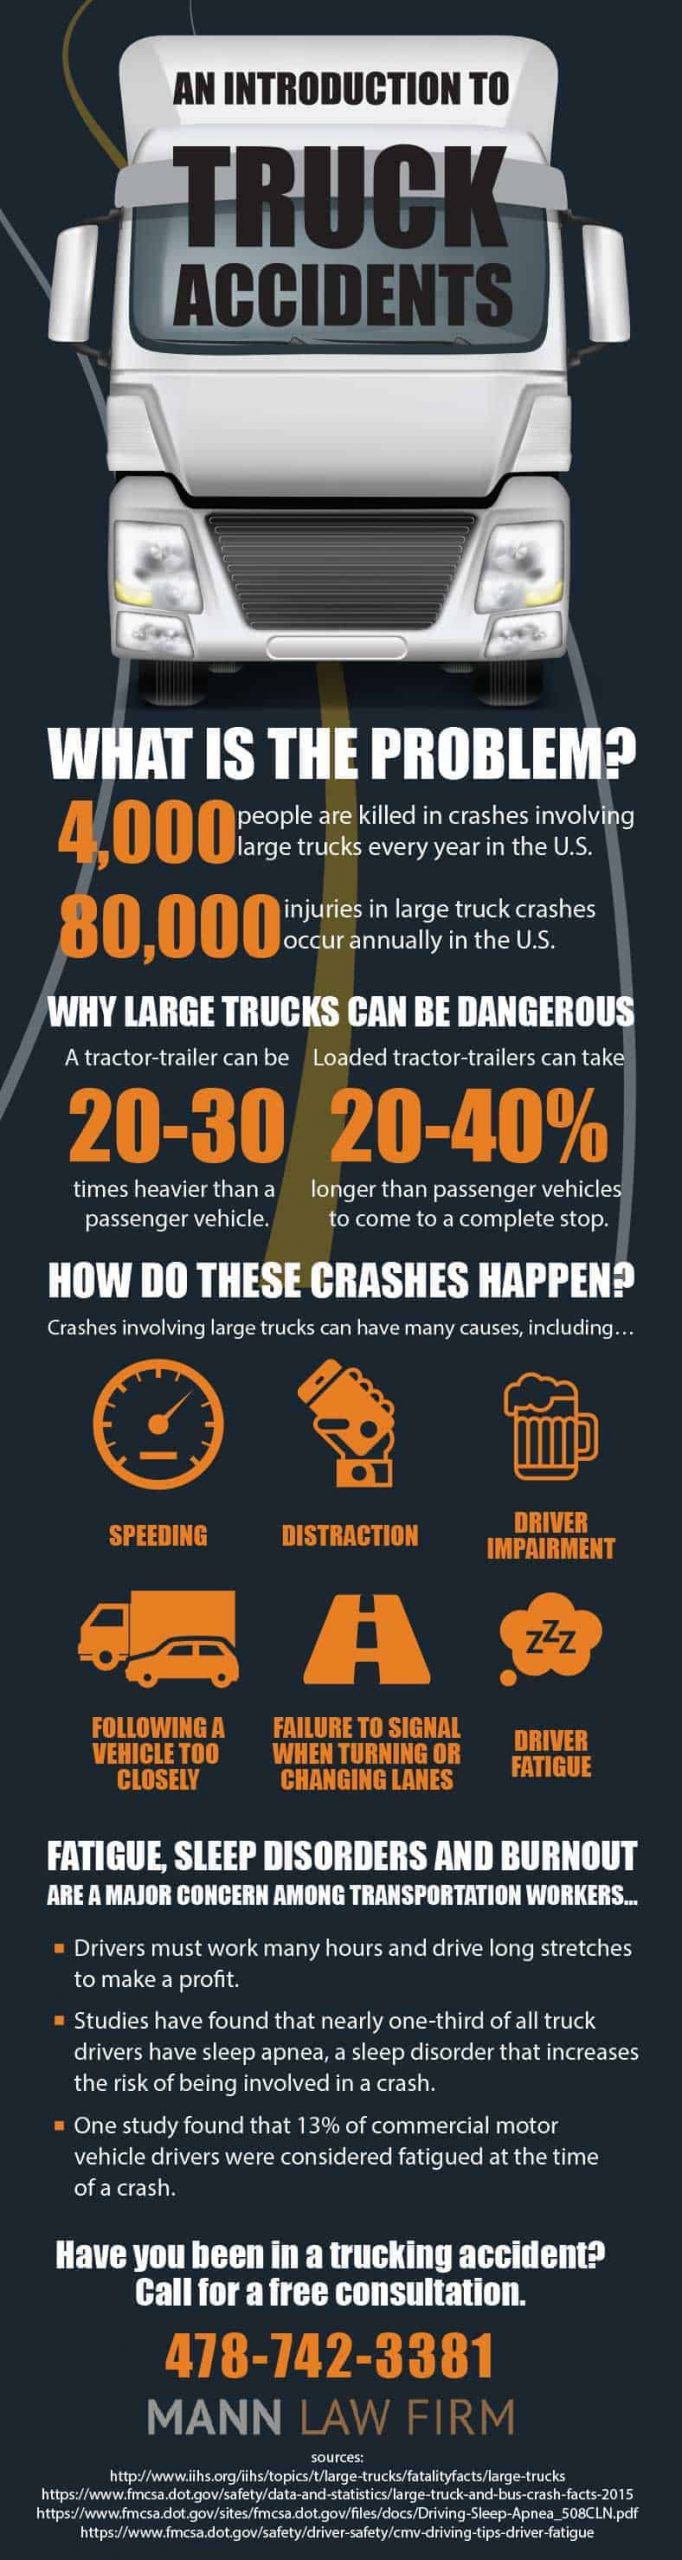 Reasons for Truck Accidents